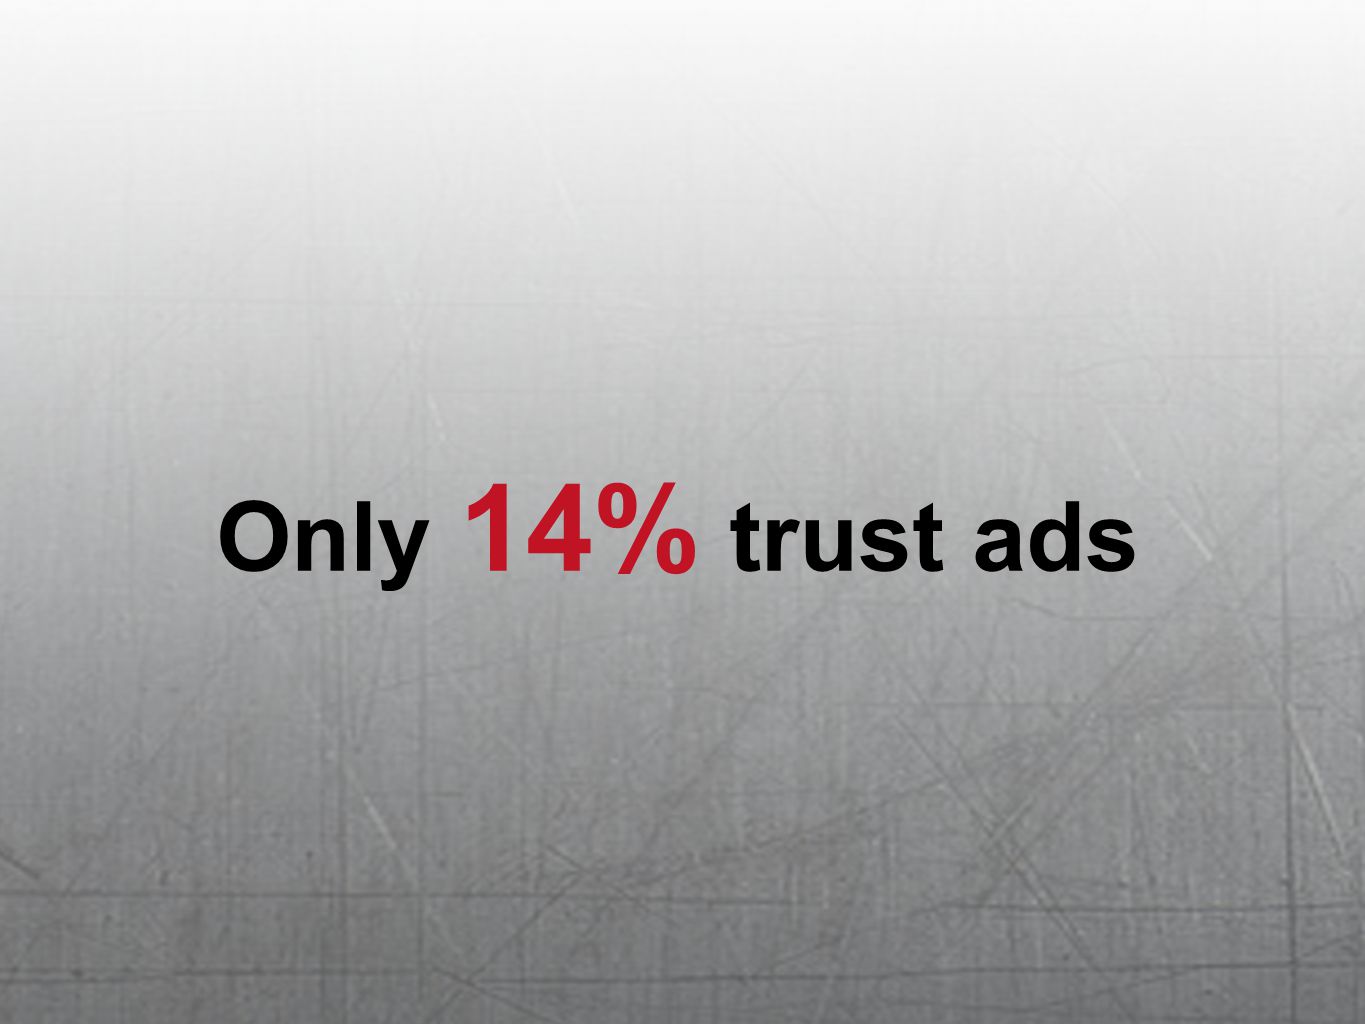 Only 14% trust ads